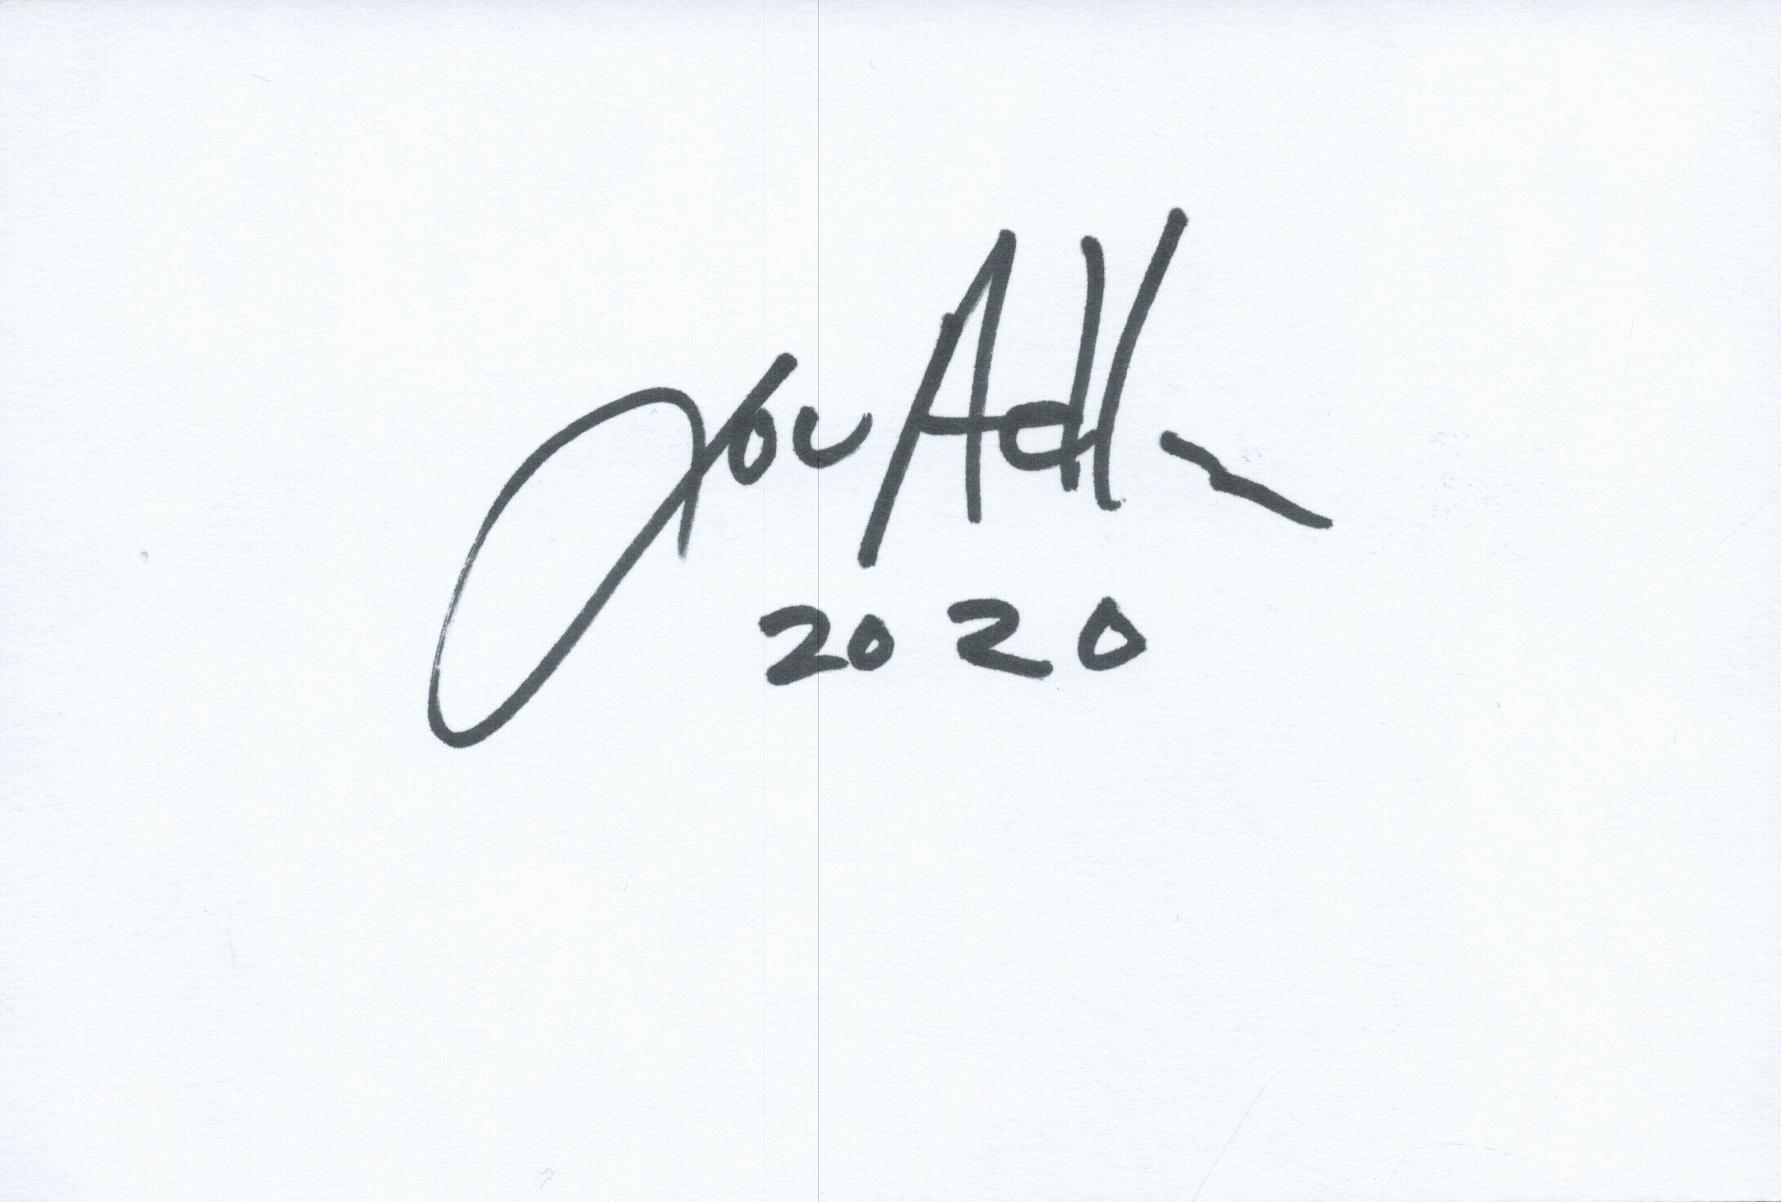 Lou Adler signed 6 x 4 white card, signed in black sharpie pen. With his signature he has also dated